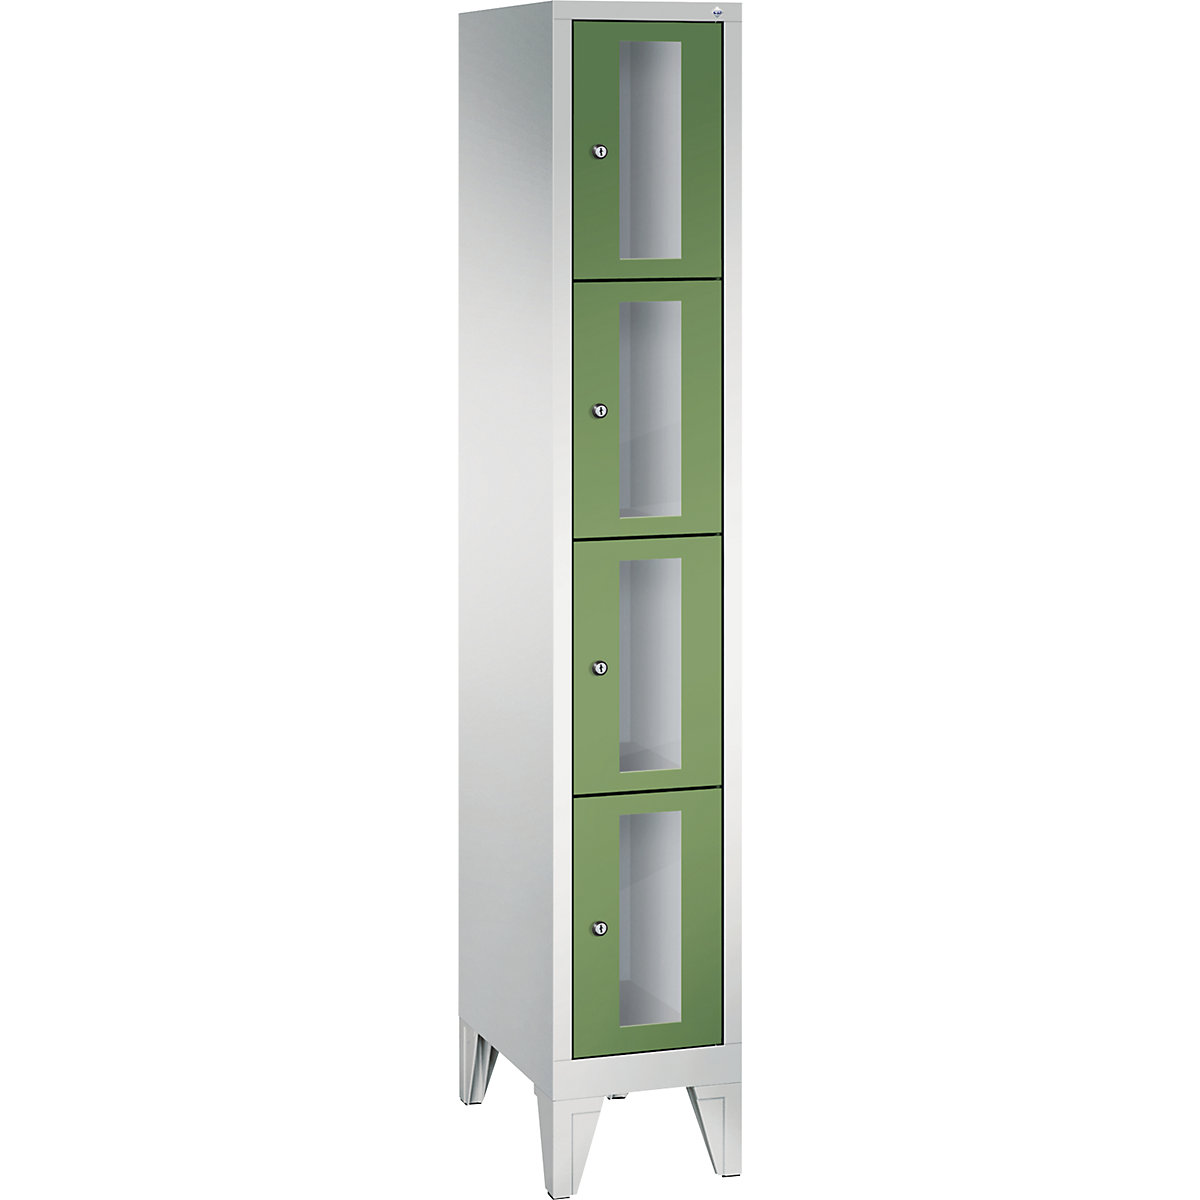 CLASSIC locker unit, compartment height 375 mm, with feet – C+P, 4 compartments, width 320 mm, reseda green door